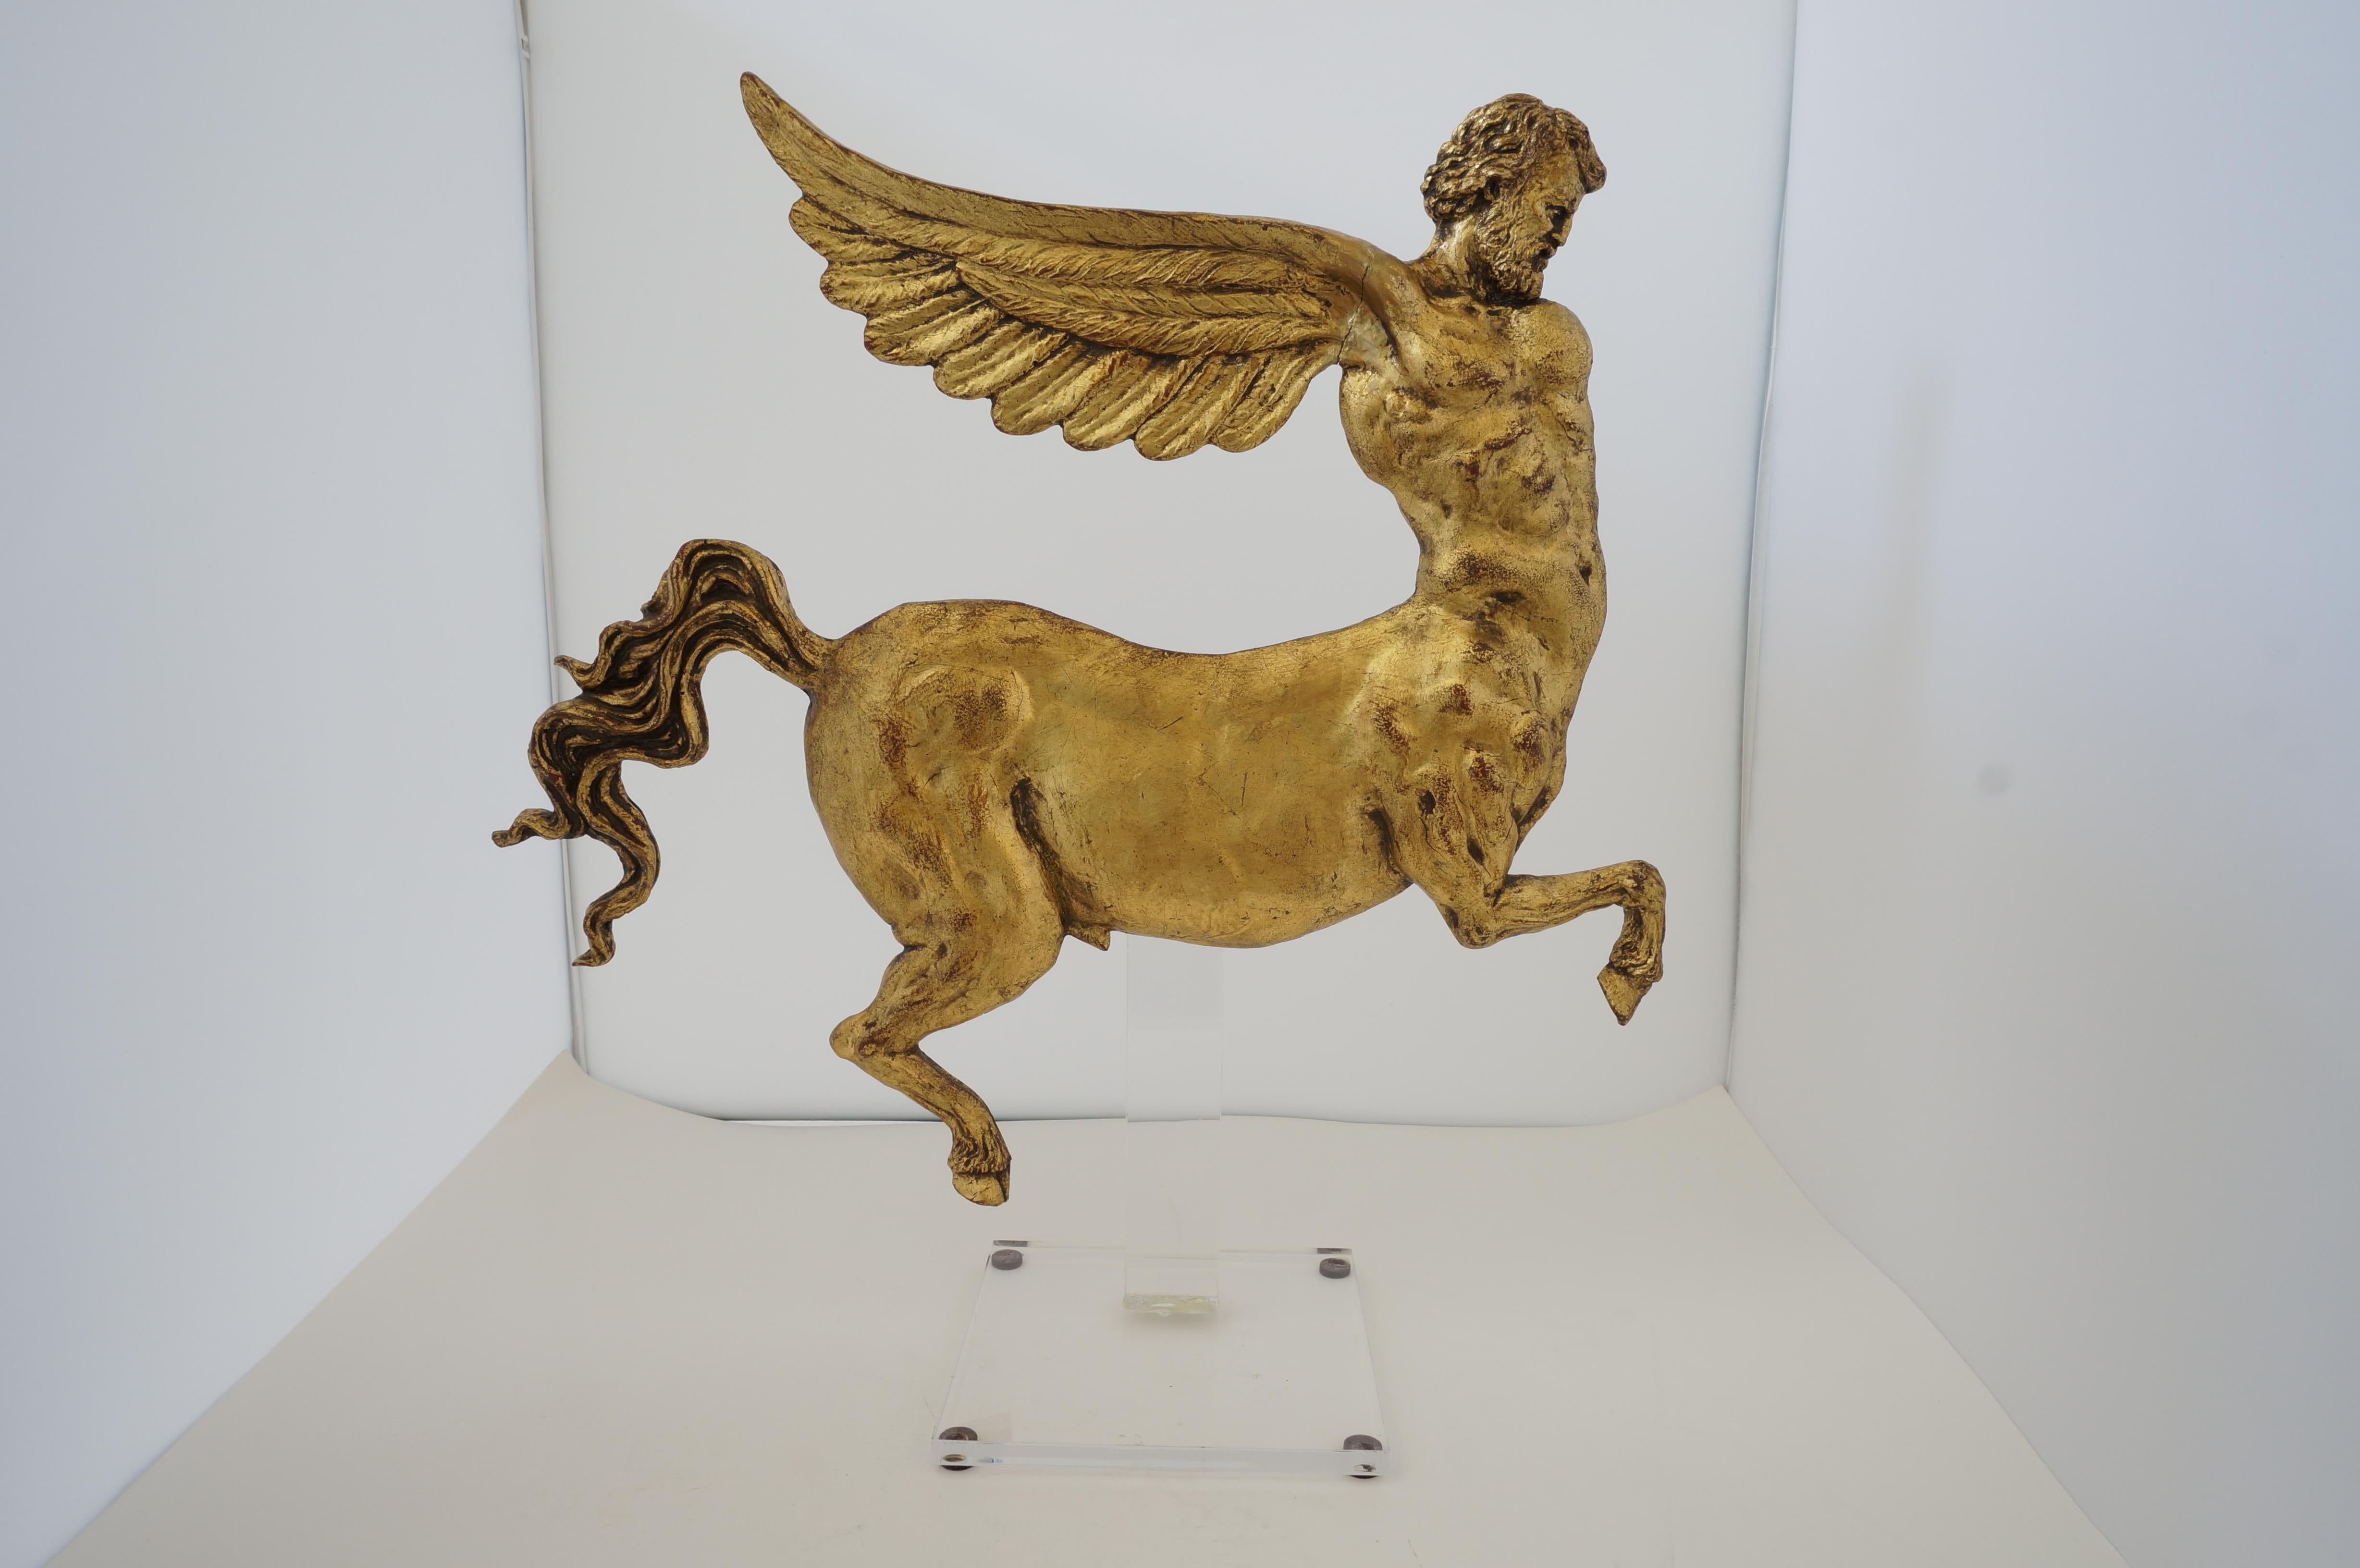 Antique Neoclassic Revival winged AlaCentaur figure with gold leaf from a Palm Beach estate. Custom Lucite stand.